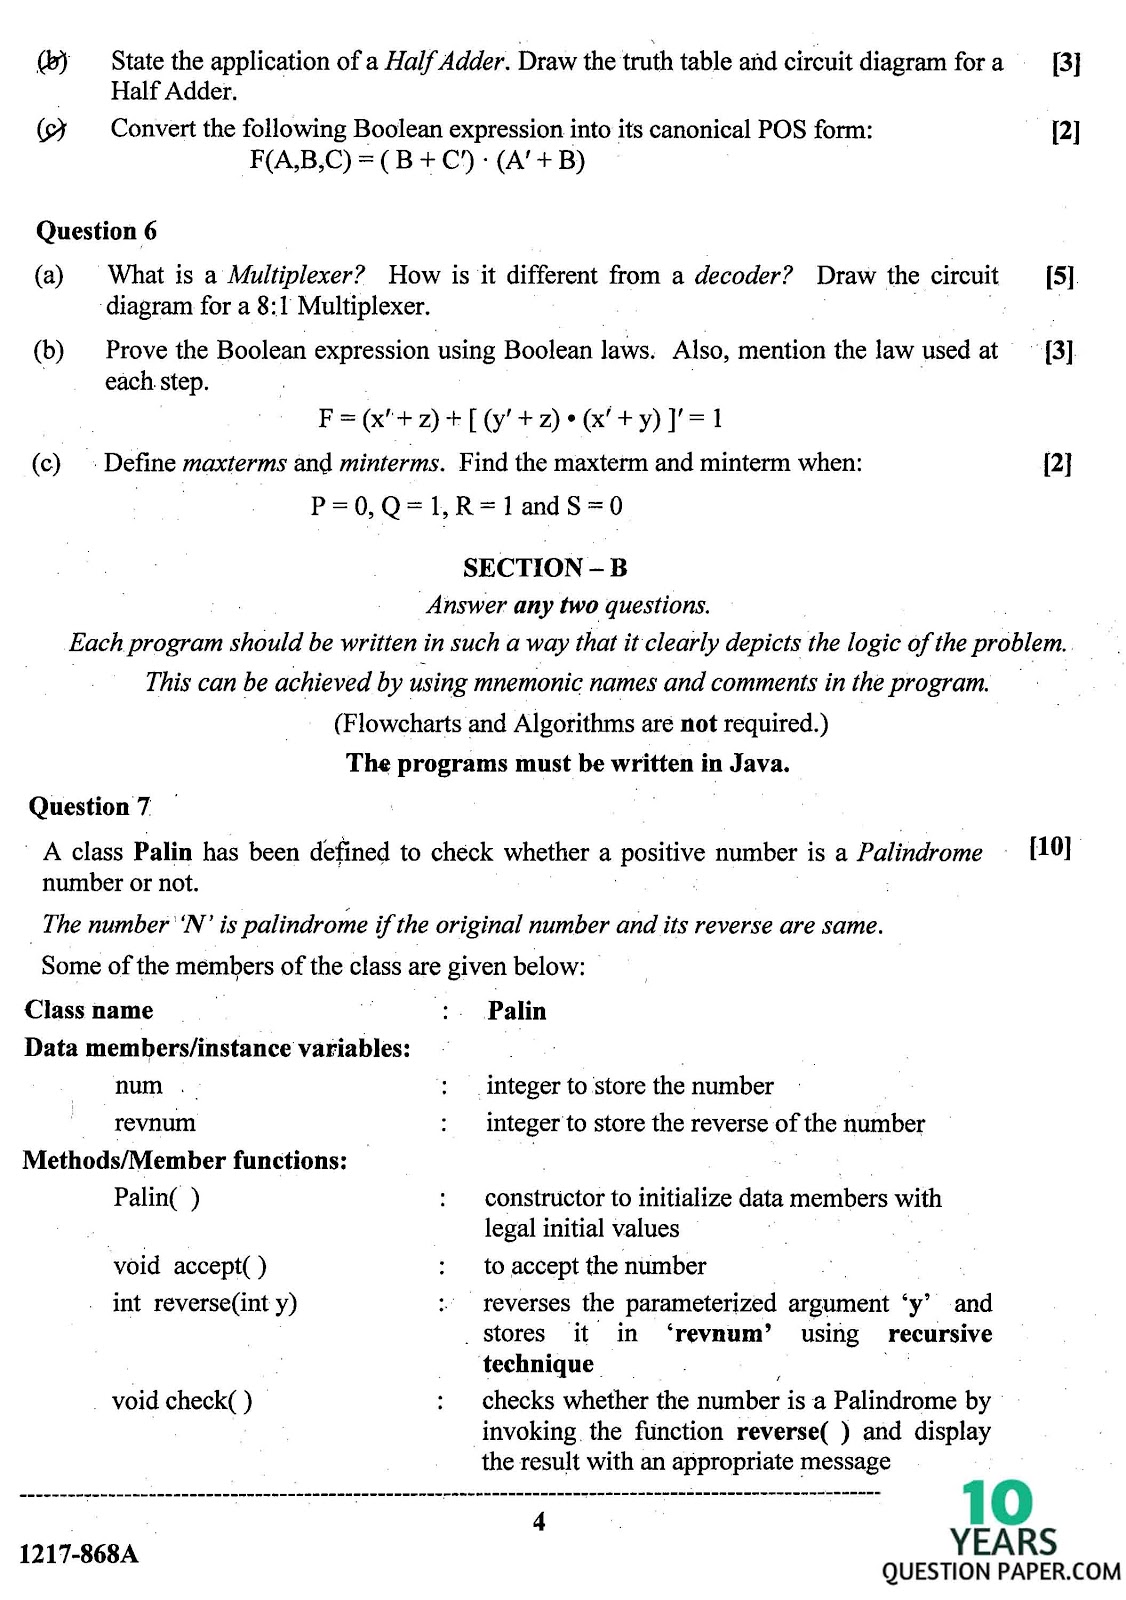 ISC Class 12 Computer Science 2017 Question Paper